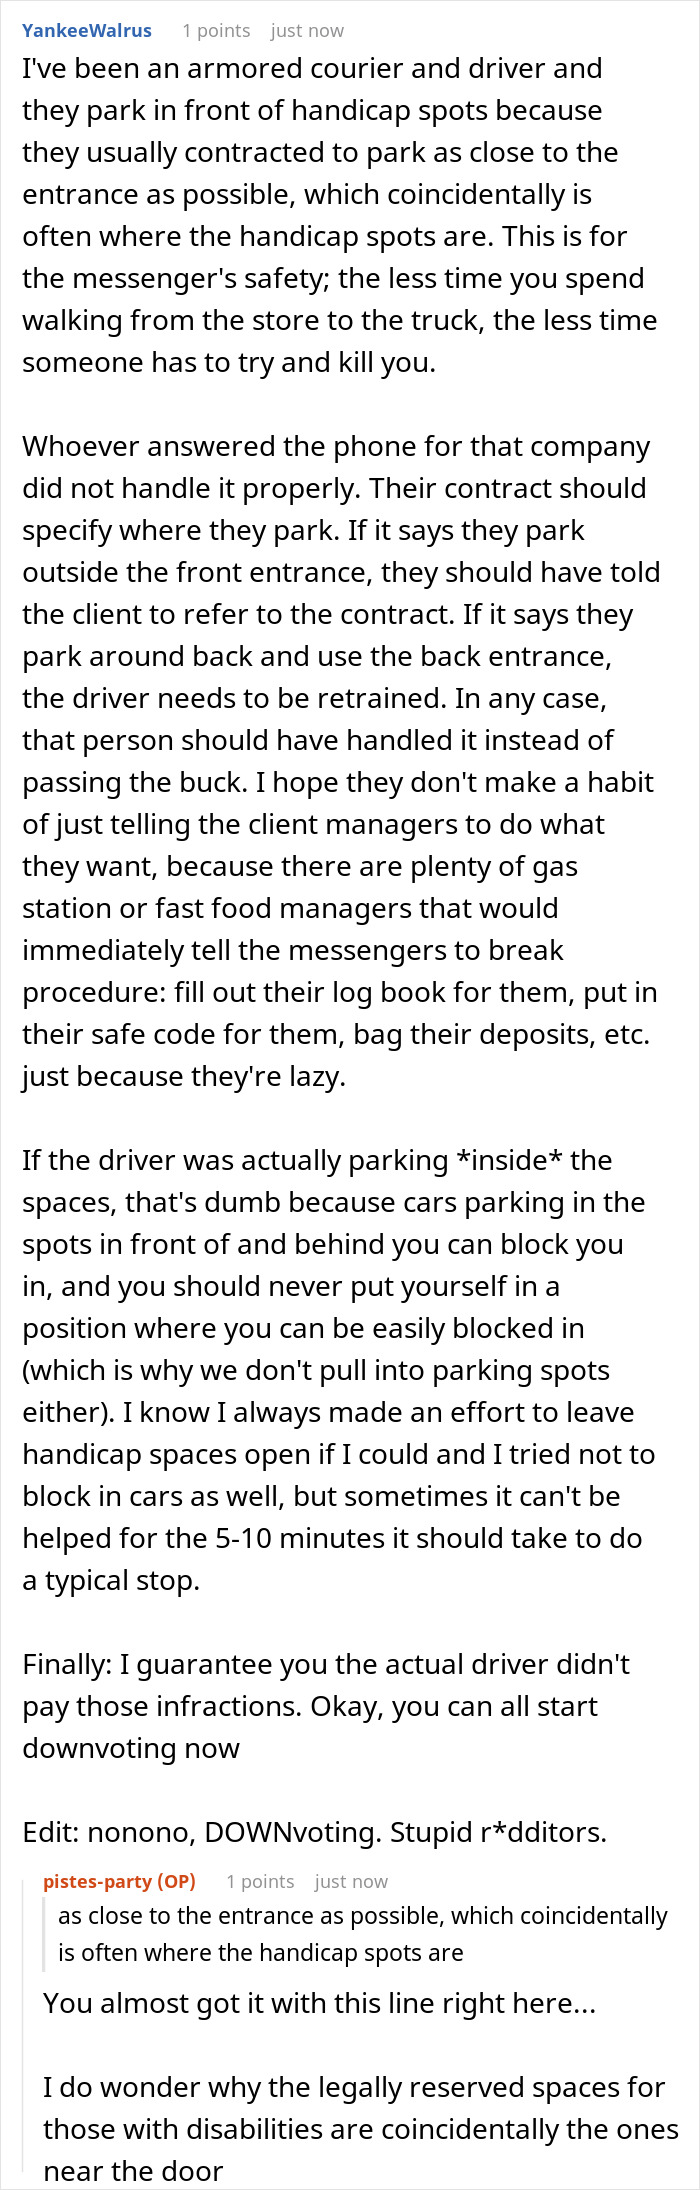 Worker Maliciously Complies With Suggestion To Deal With Delivery Driver Who Hogs The Handicap Spot